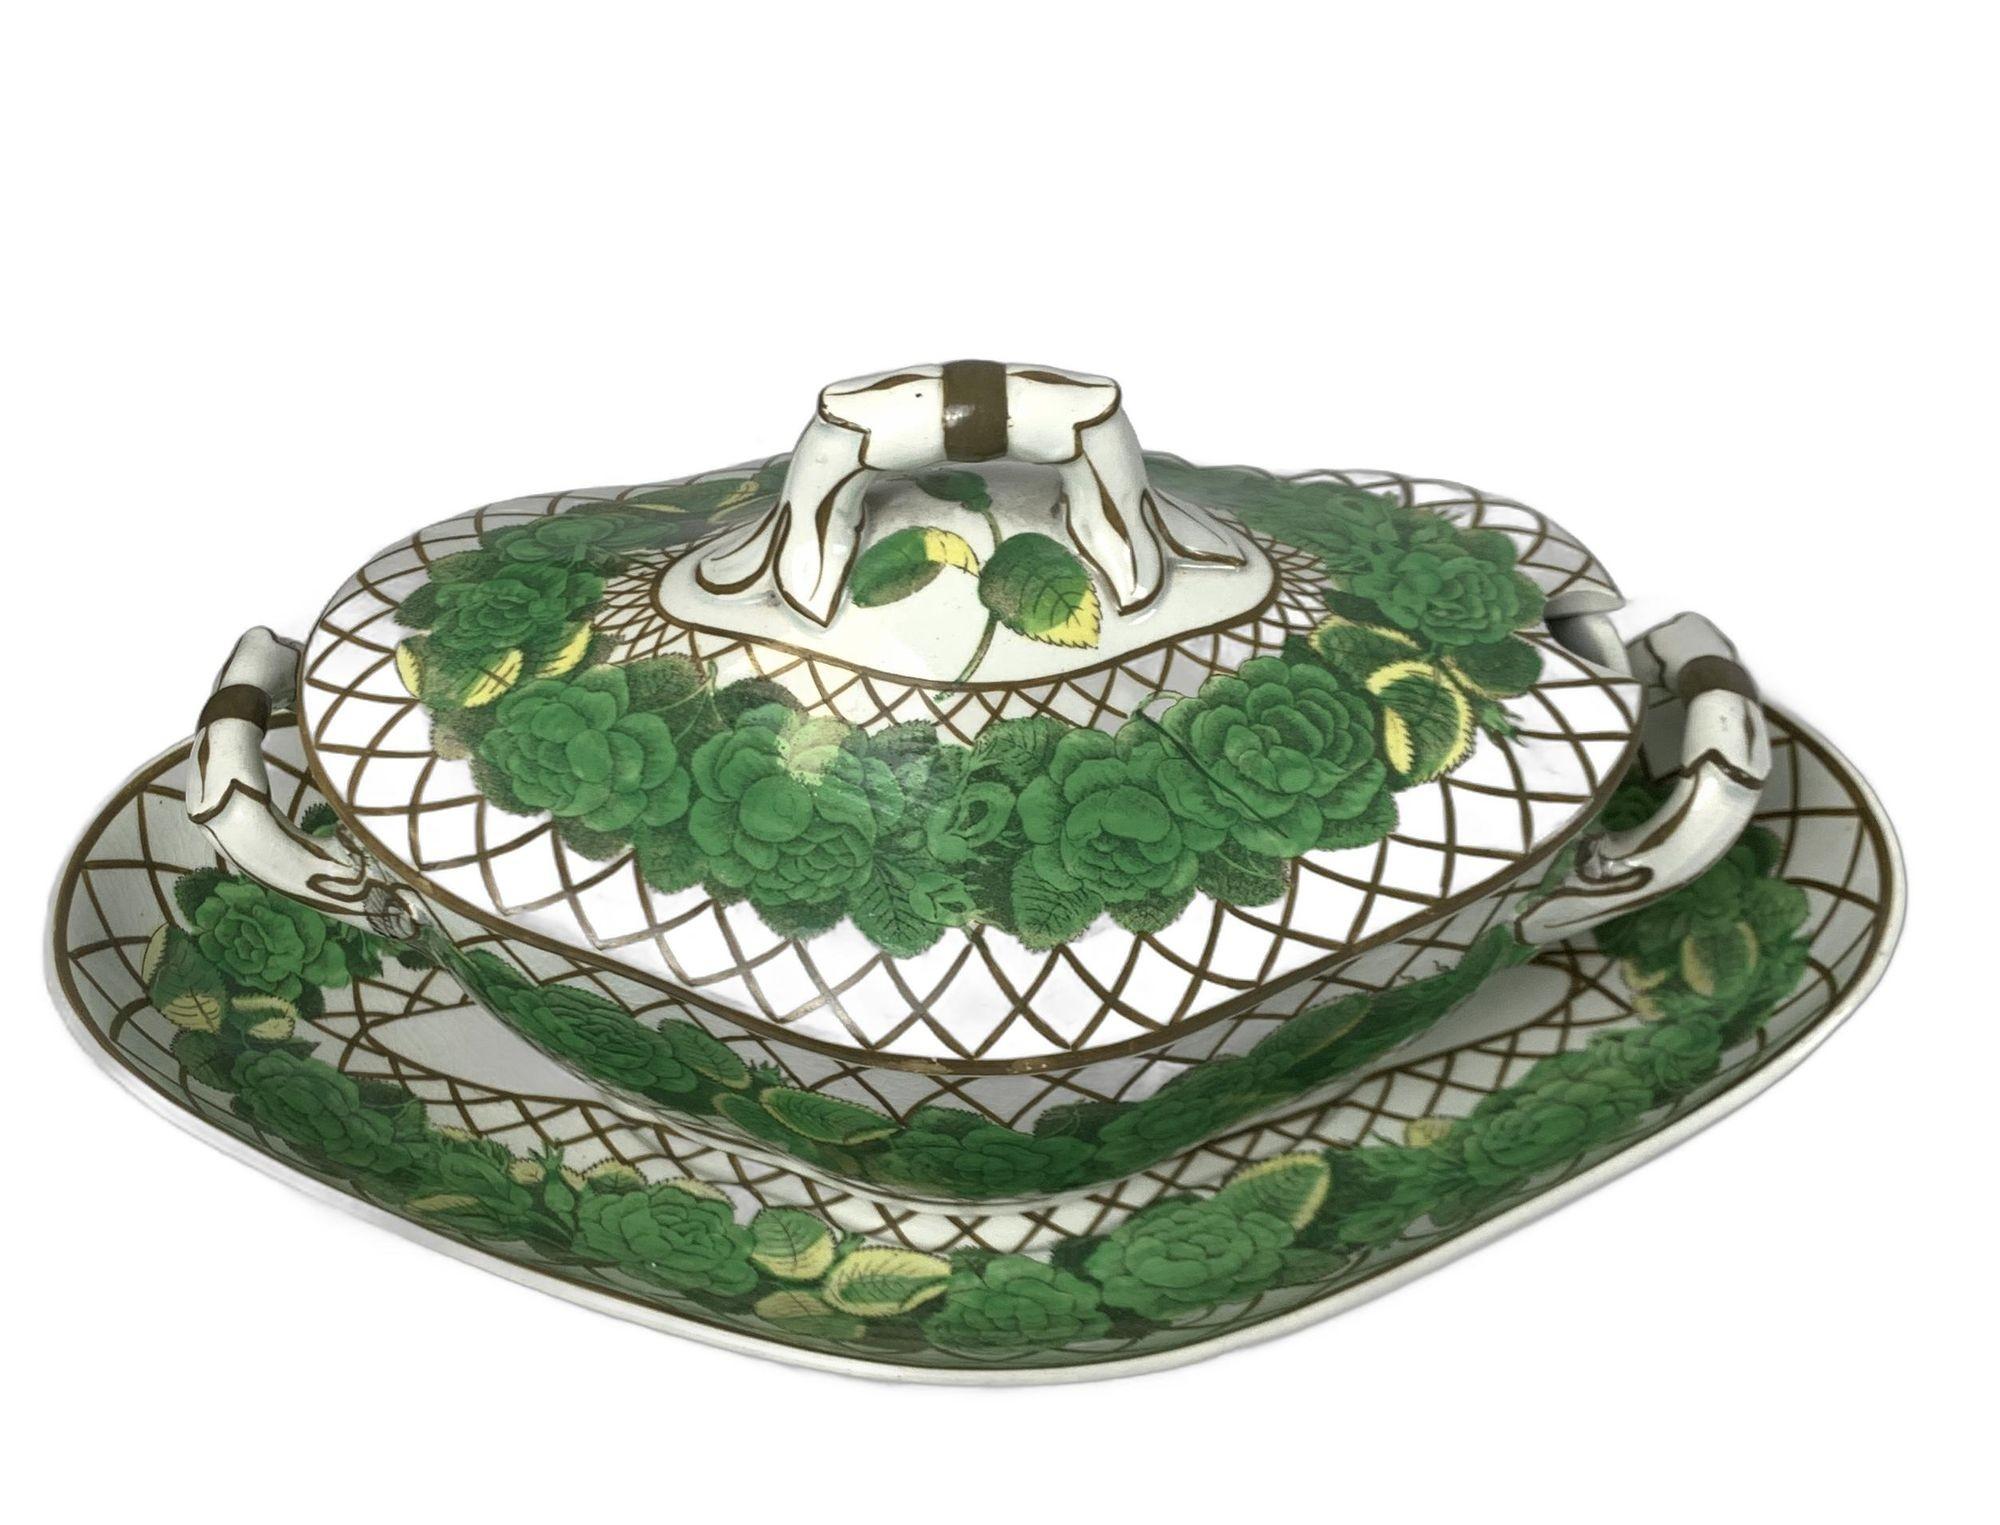 Made in England circa 1810
This set of Spode pearlware dishes features a band of green roses highlighted with yellow and bordered by a brown lattice pattern.
The center of each dish of the four oval-shaped dishes and the underplate of the tureen